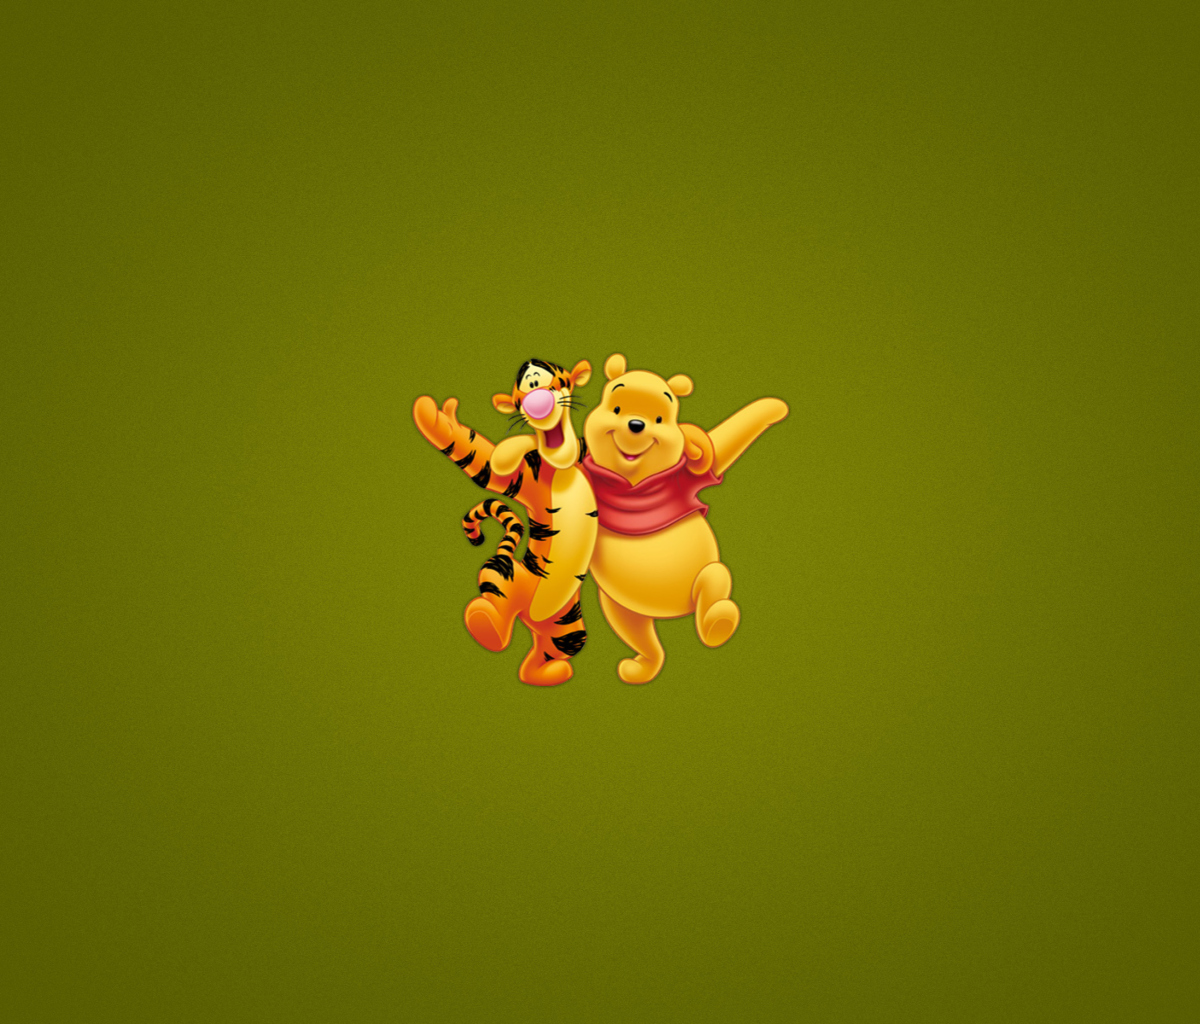 Winnie The Pooh And Tiger wallpaper 1200x1024